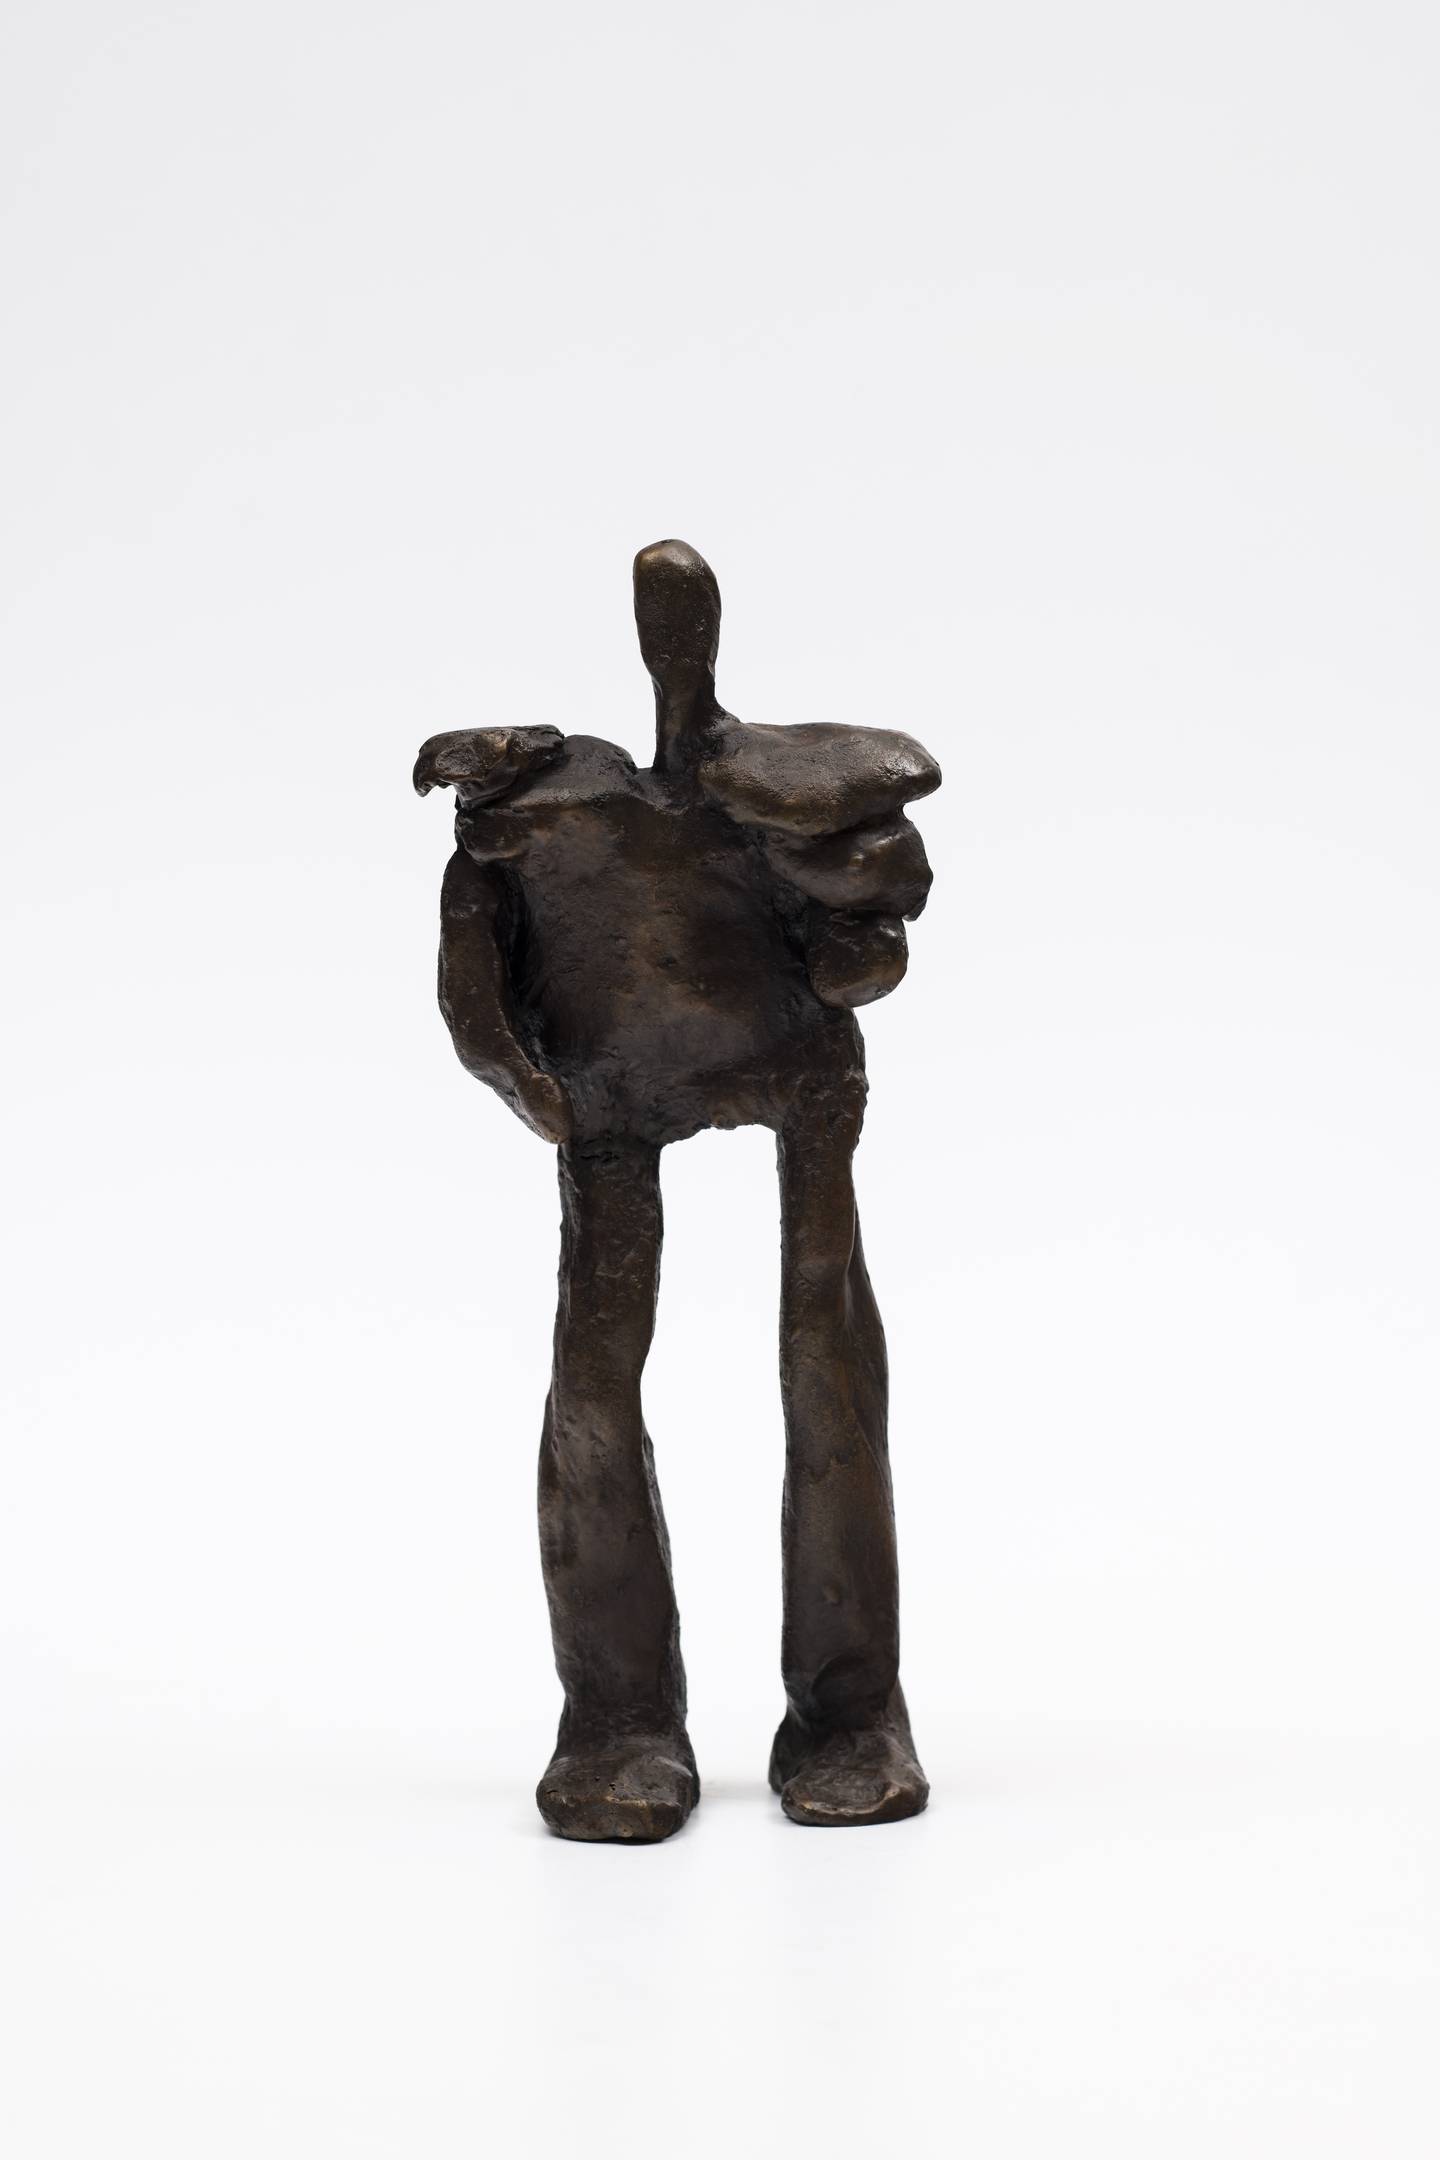 Originally cast in clay, 'The Master' was one of Simone Fattal's favourite sculptures. She recast the work in bronze in 1998 after it broke apart. Photo: Fancois Doury